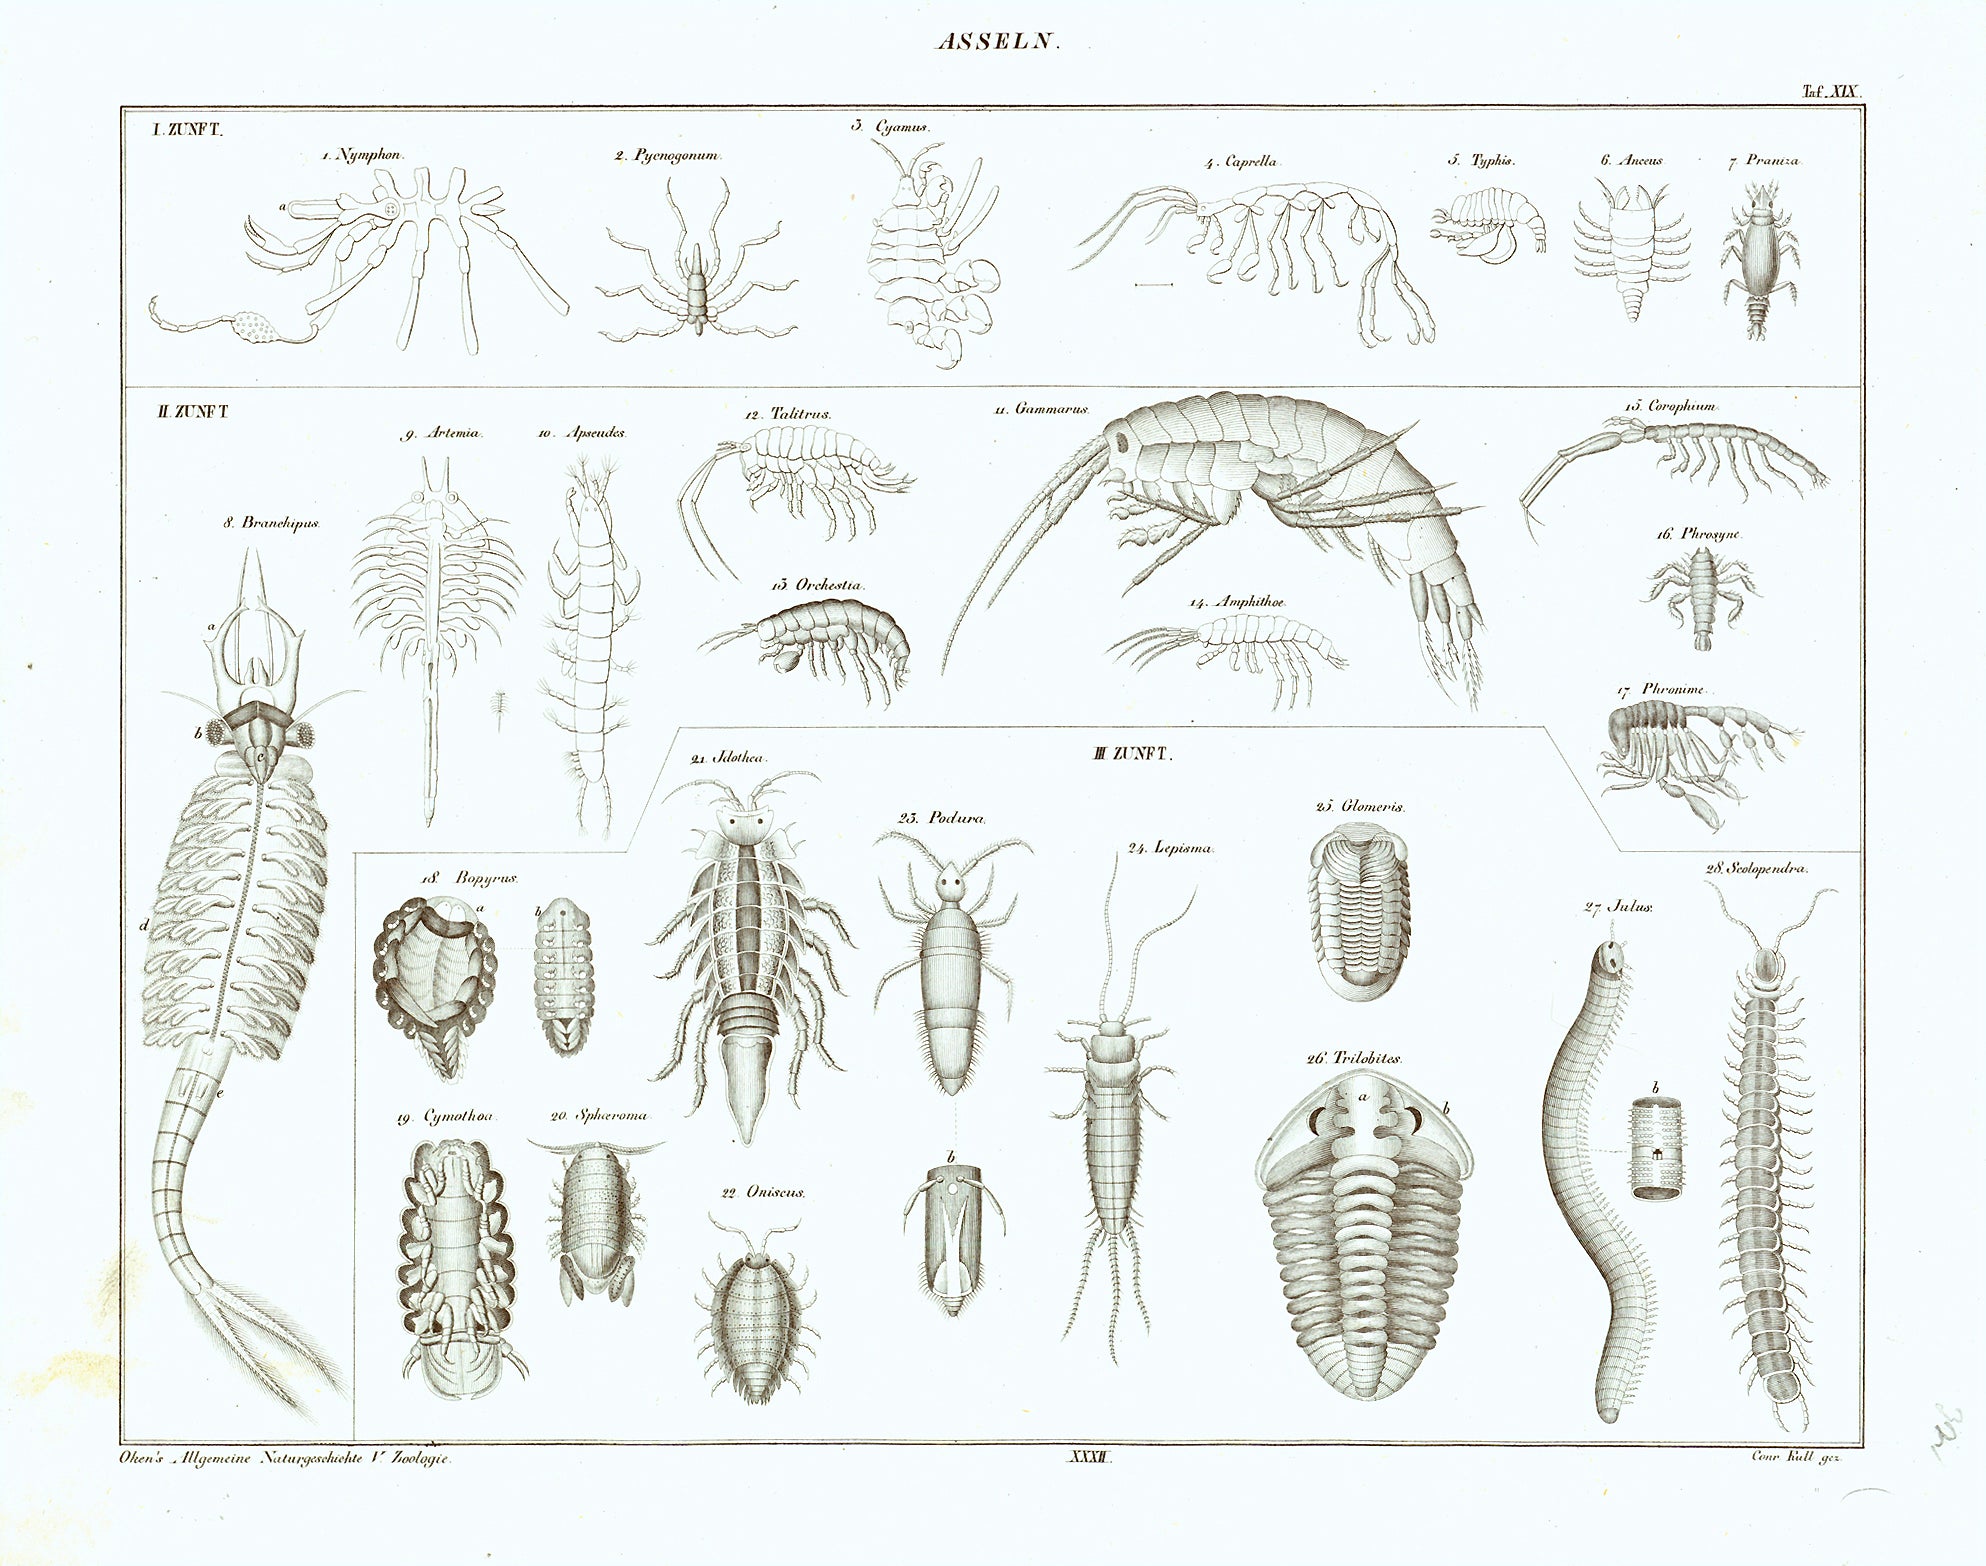 "Asseln"  Latin names of some creatures shown: Brachipus, Caprella, Artemia, Podura, Julus, Talitrus...  Steel engraving by Conrad Kull for "Okens Allgemeine Naturgeschichte " ca 1845. A few signs of age and use in margins.  Image: 22.5 x 29.5 cm (8.8 x 11.6")  Original antique print 